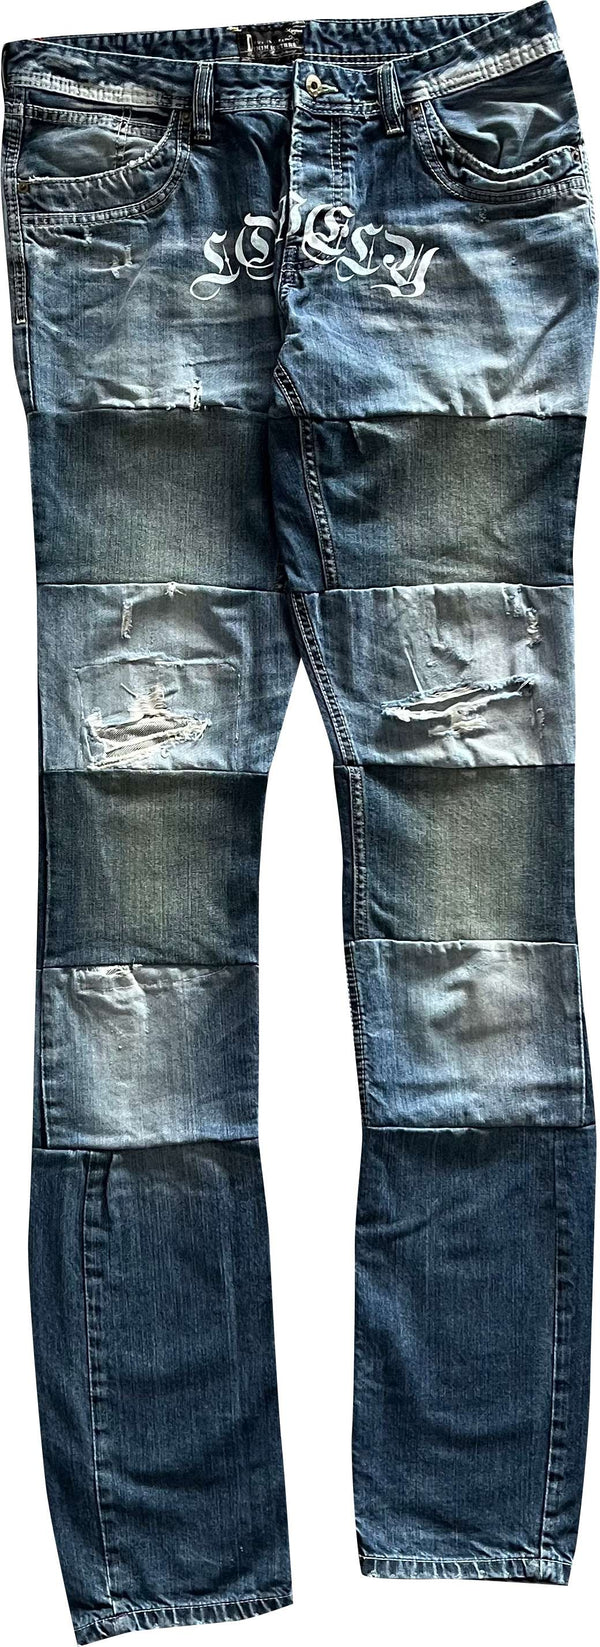 Lovely Death Dreams jeans custom distressed blue 18